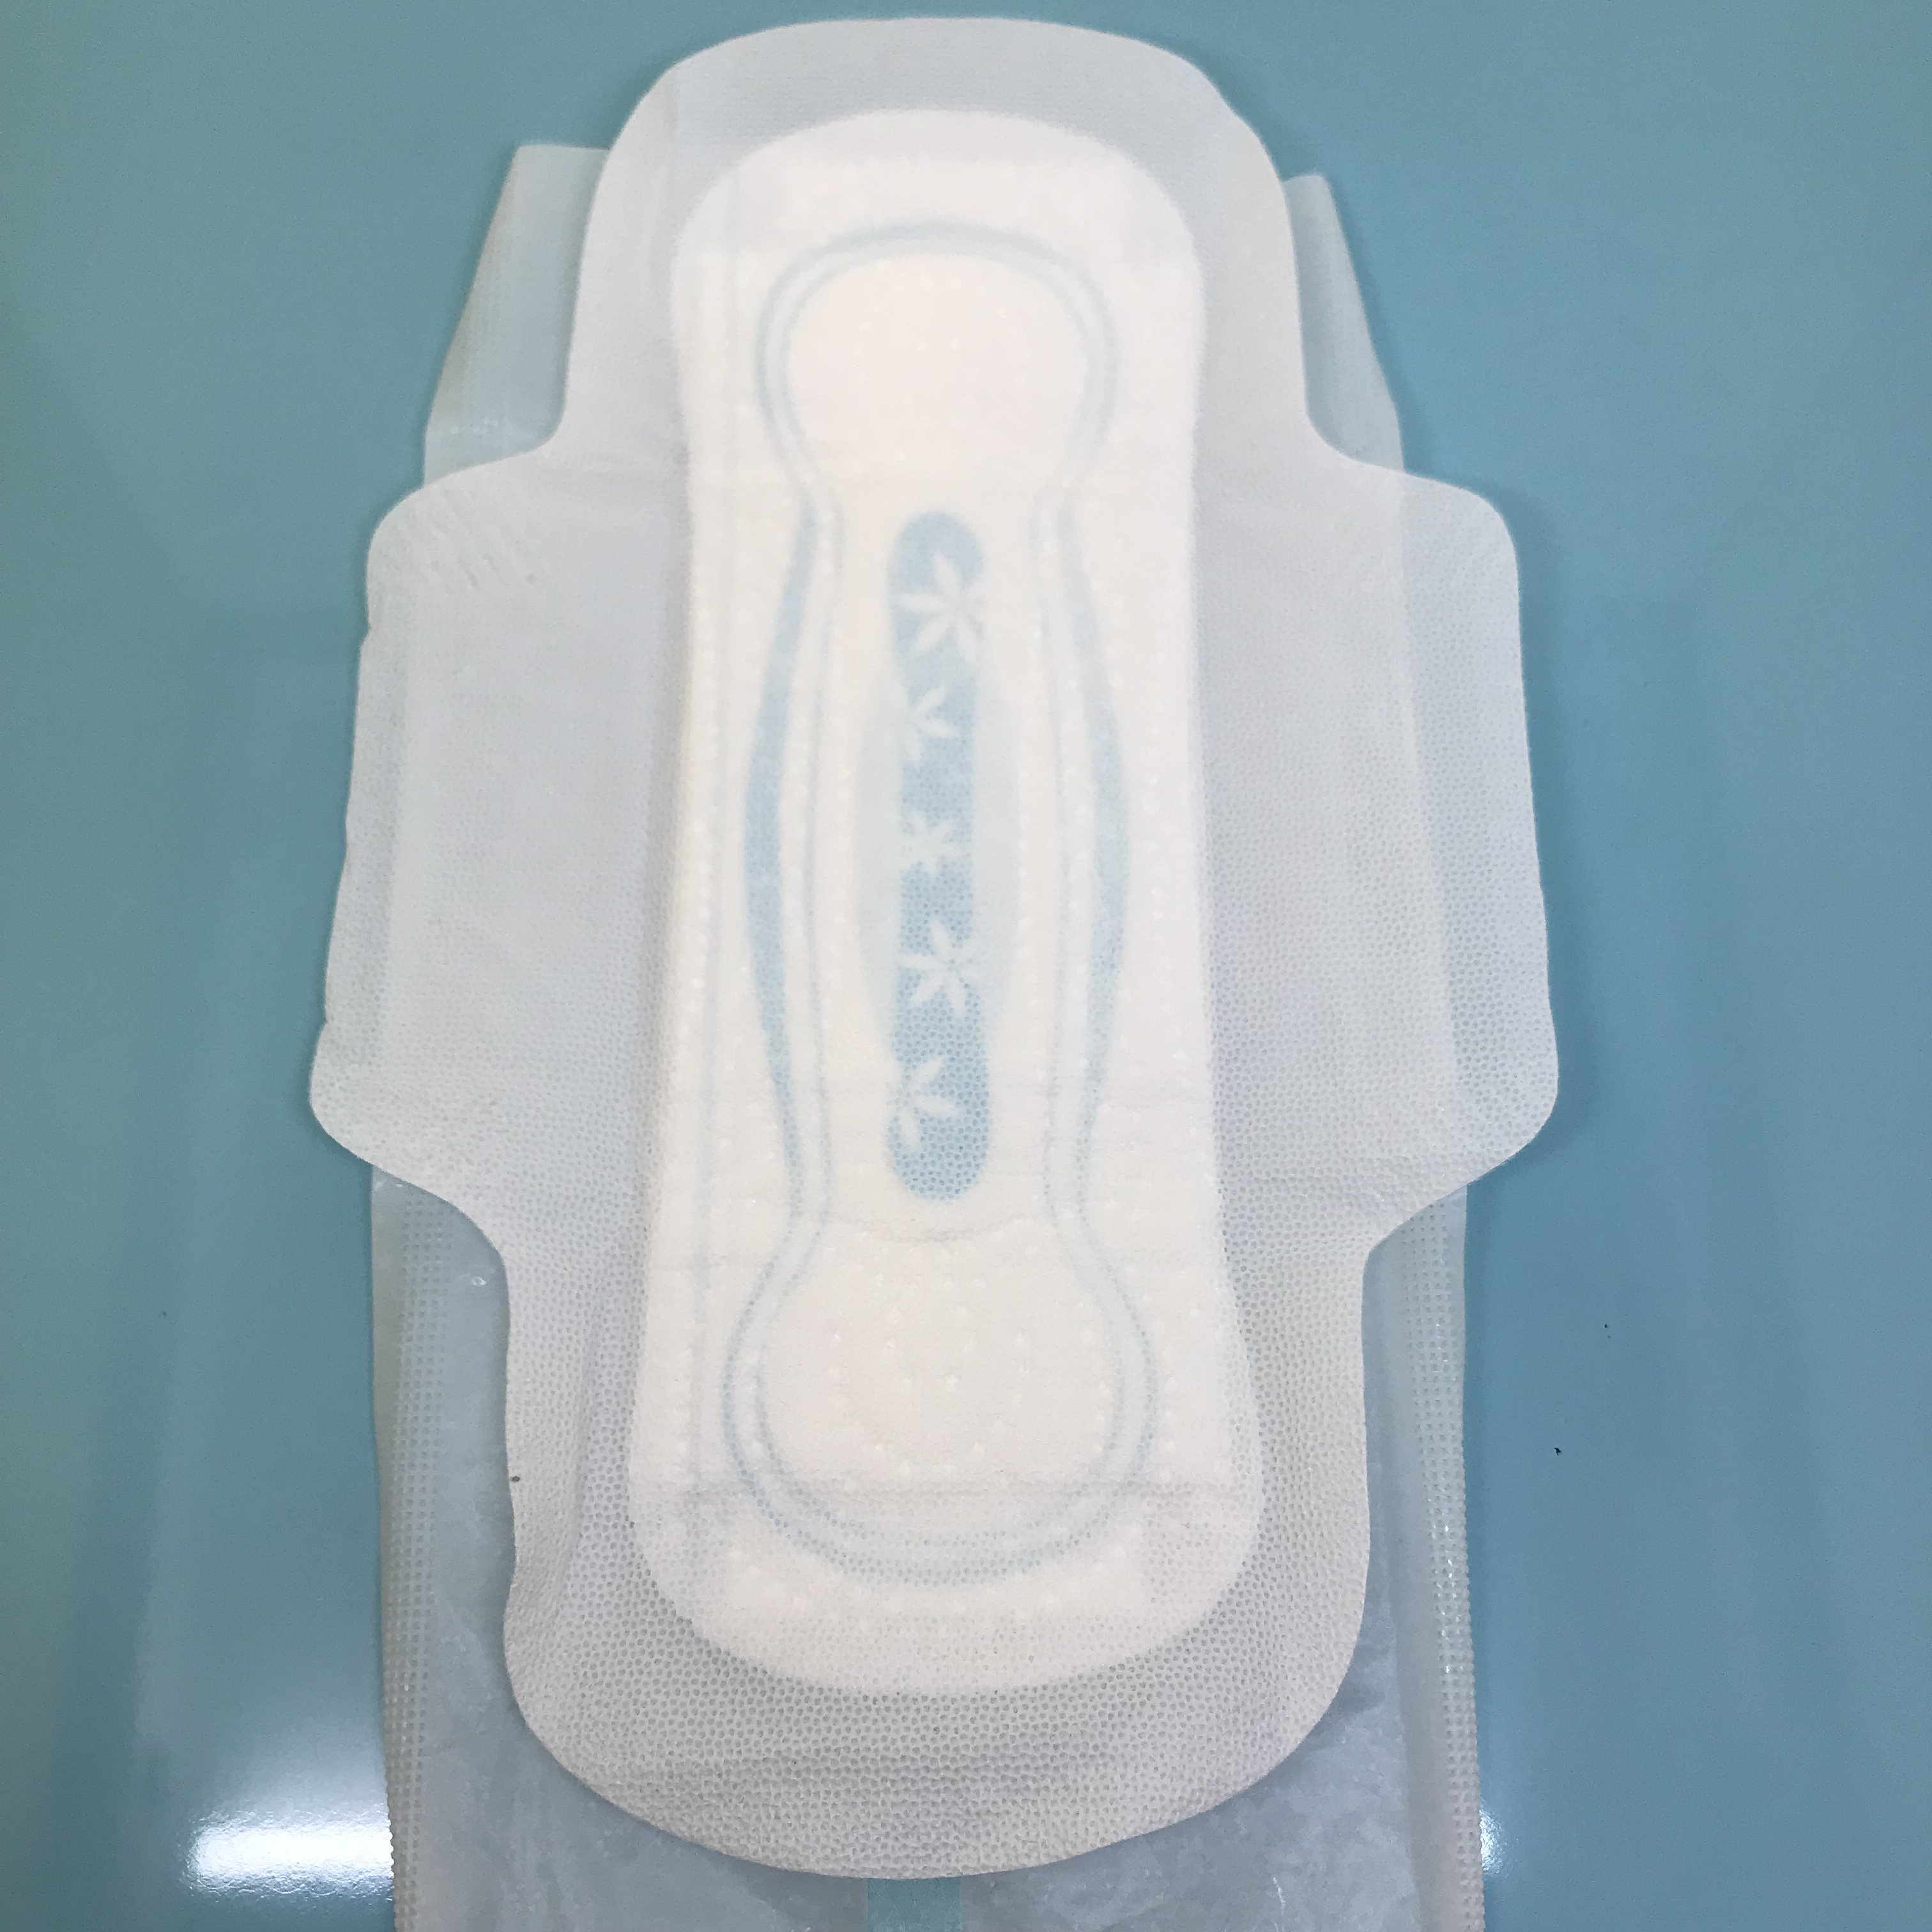 Good quality Private Sanitary Napkin – Soft touch cotton young girl sanitary napkin Quanzhou manufacturer – Union Paper